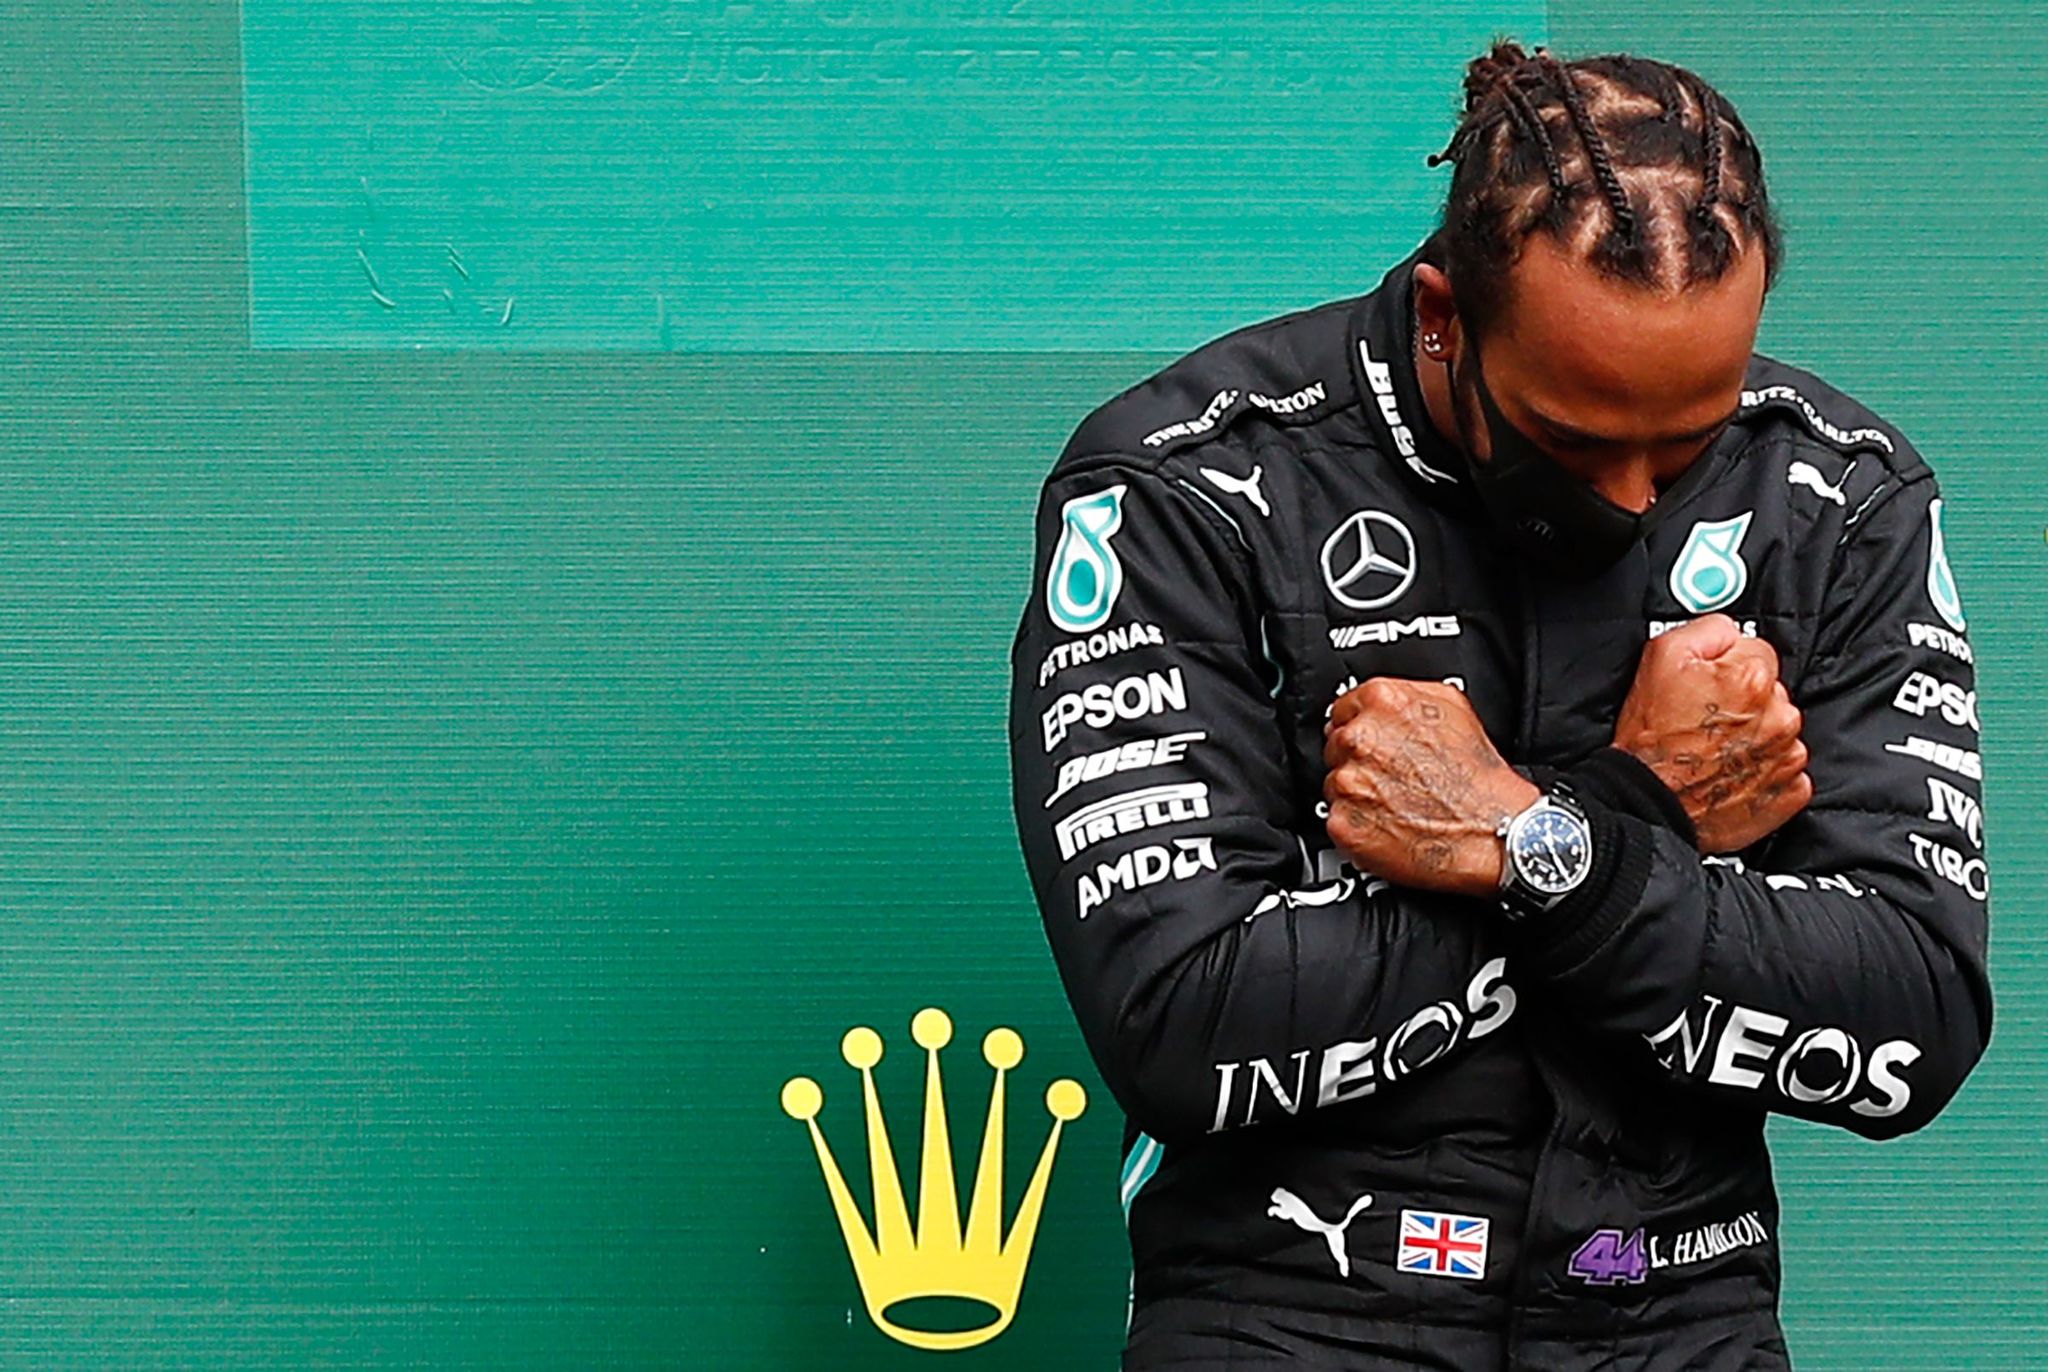 Mercedes British driver Lewis lt;HIT gt;Hamilton lt;/HIT gt; gestures on the podium after winning the Belgian Formula One Grand Prix at the Spa-Francorchamps circuit in Spa on August 30, 2020. (Photo by FRANCOIS LENOIR / POOL / AFP)